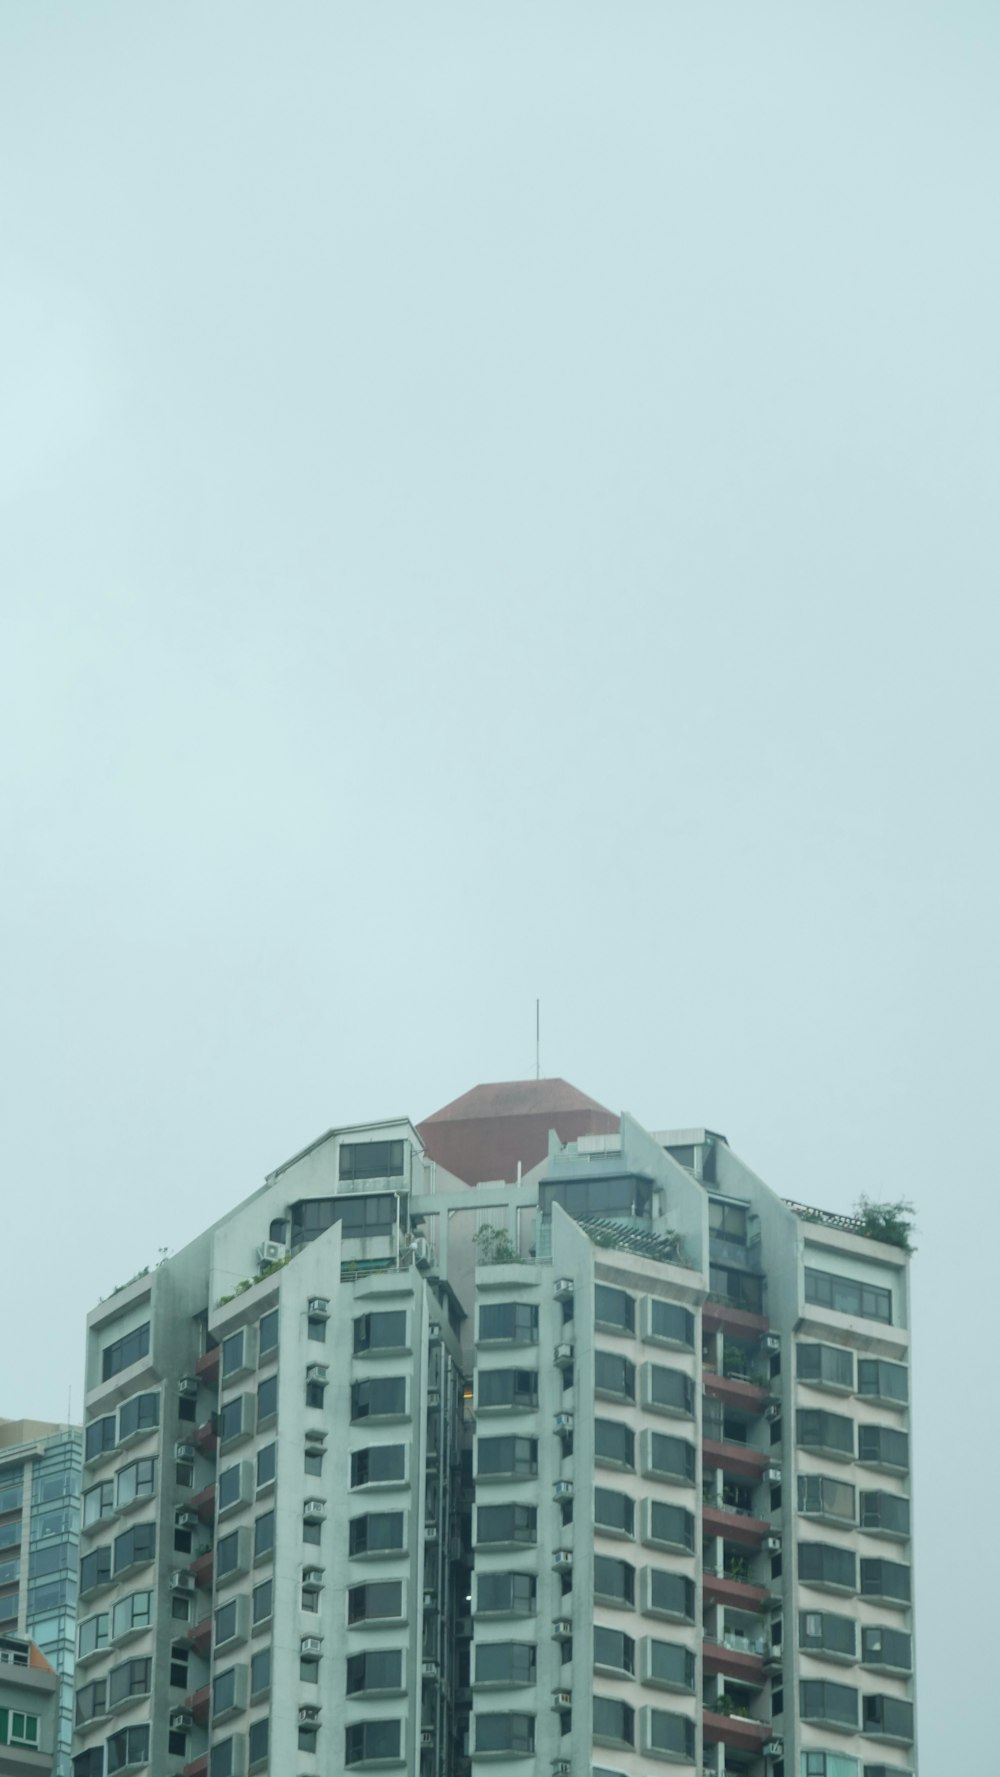 a tall building with a red roof on a cloudy day